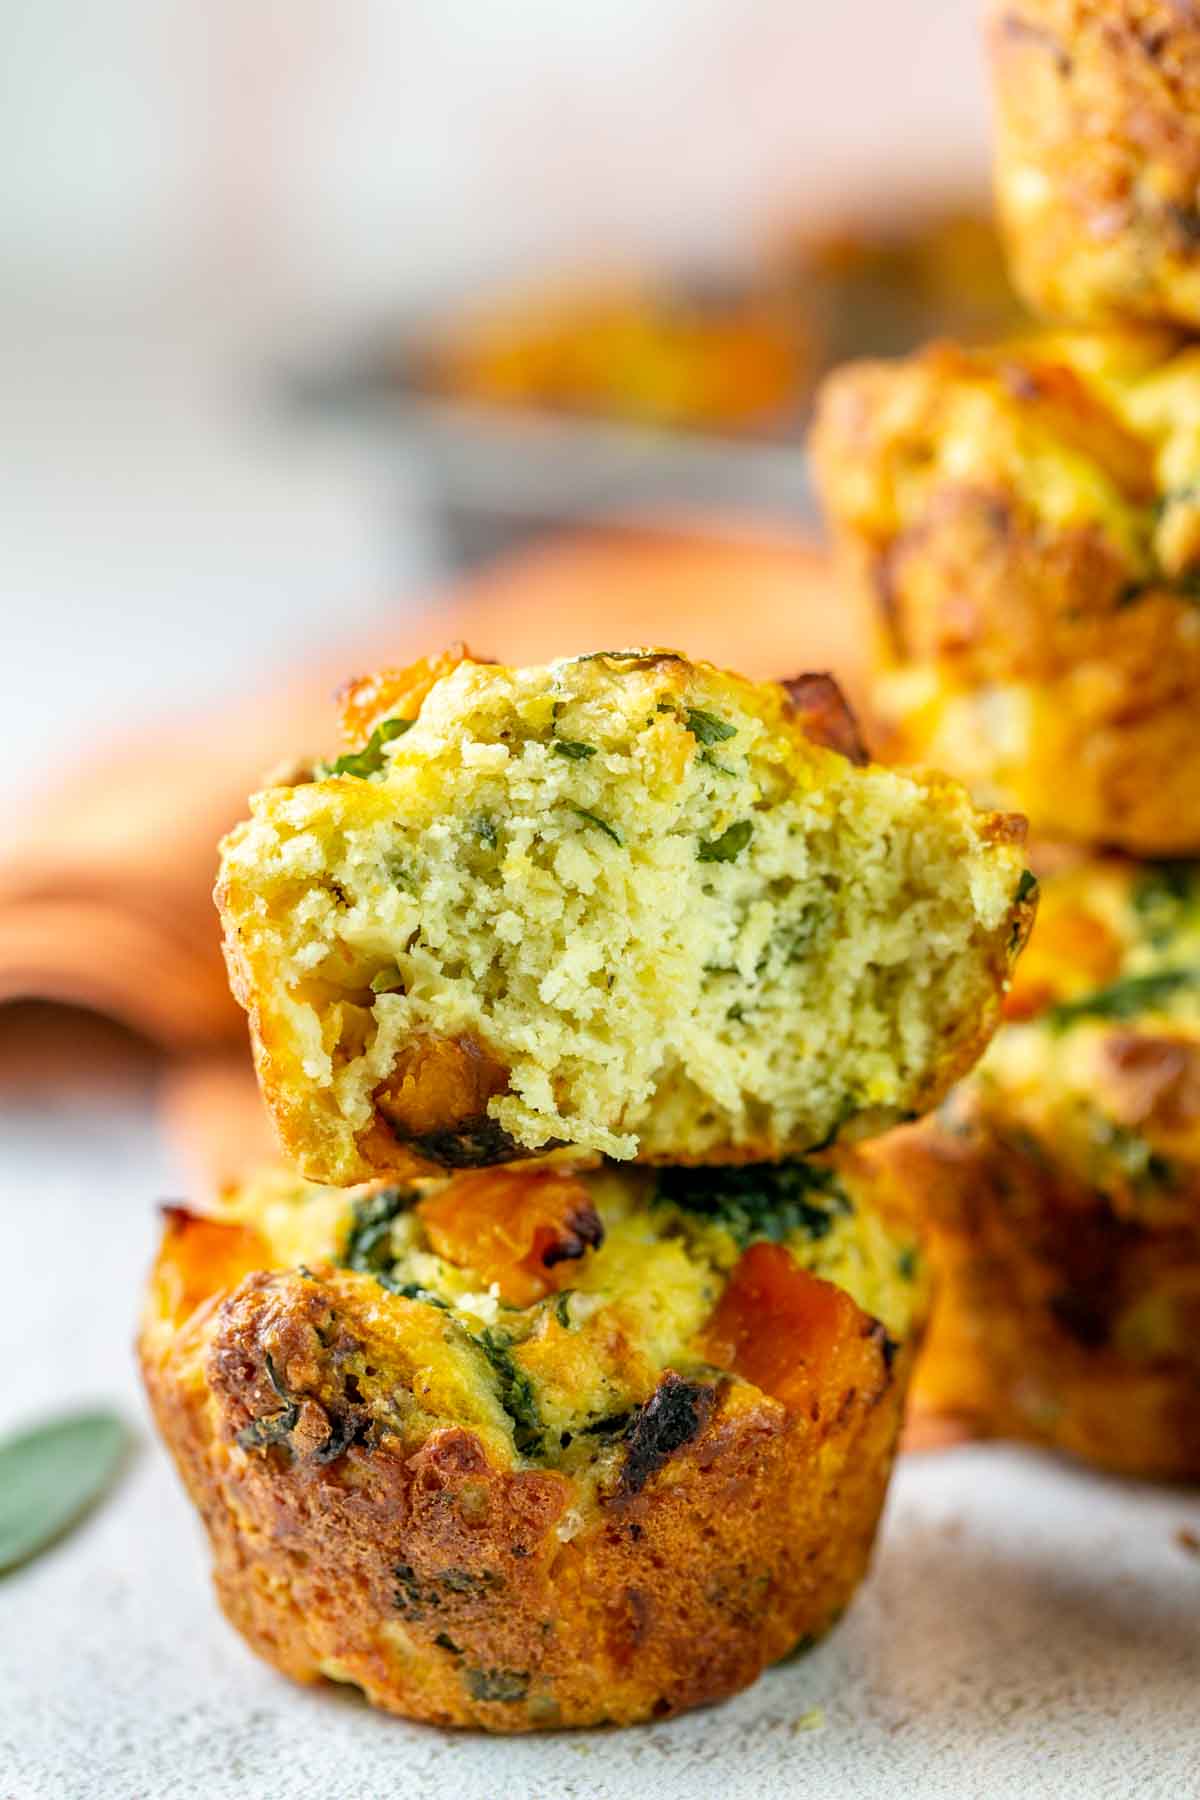 a half of a muffin stacked on top of a whole muffin showing the tight crumb and kale insisde.